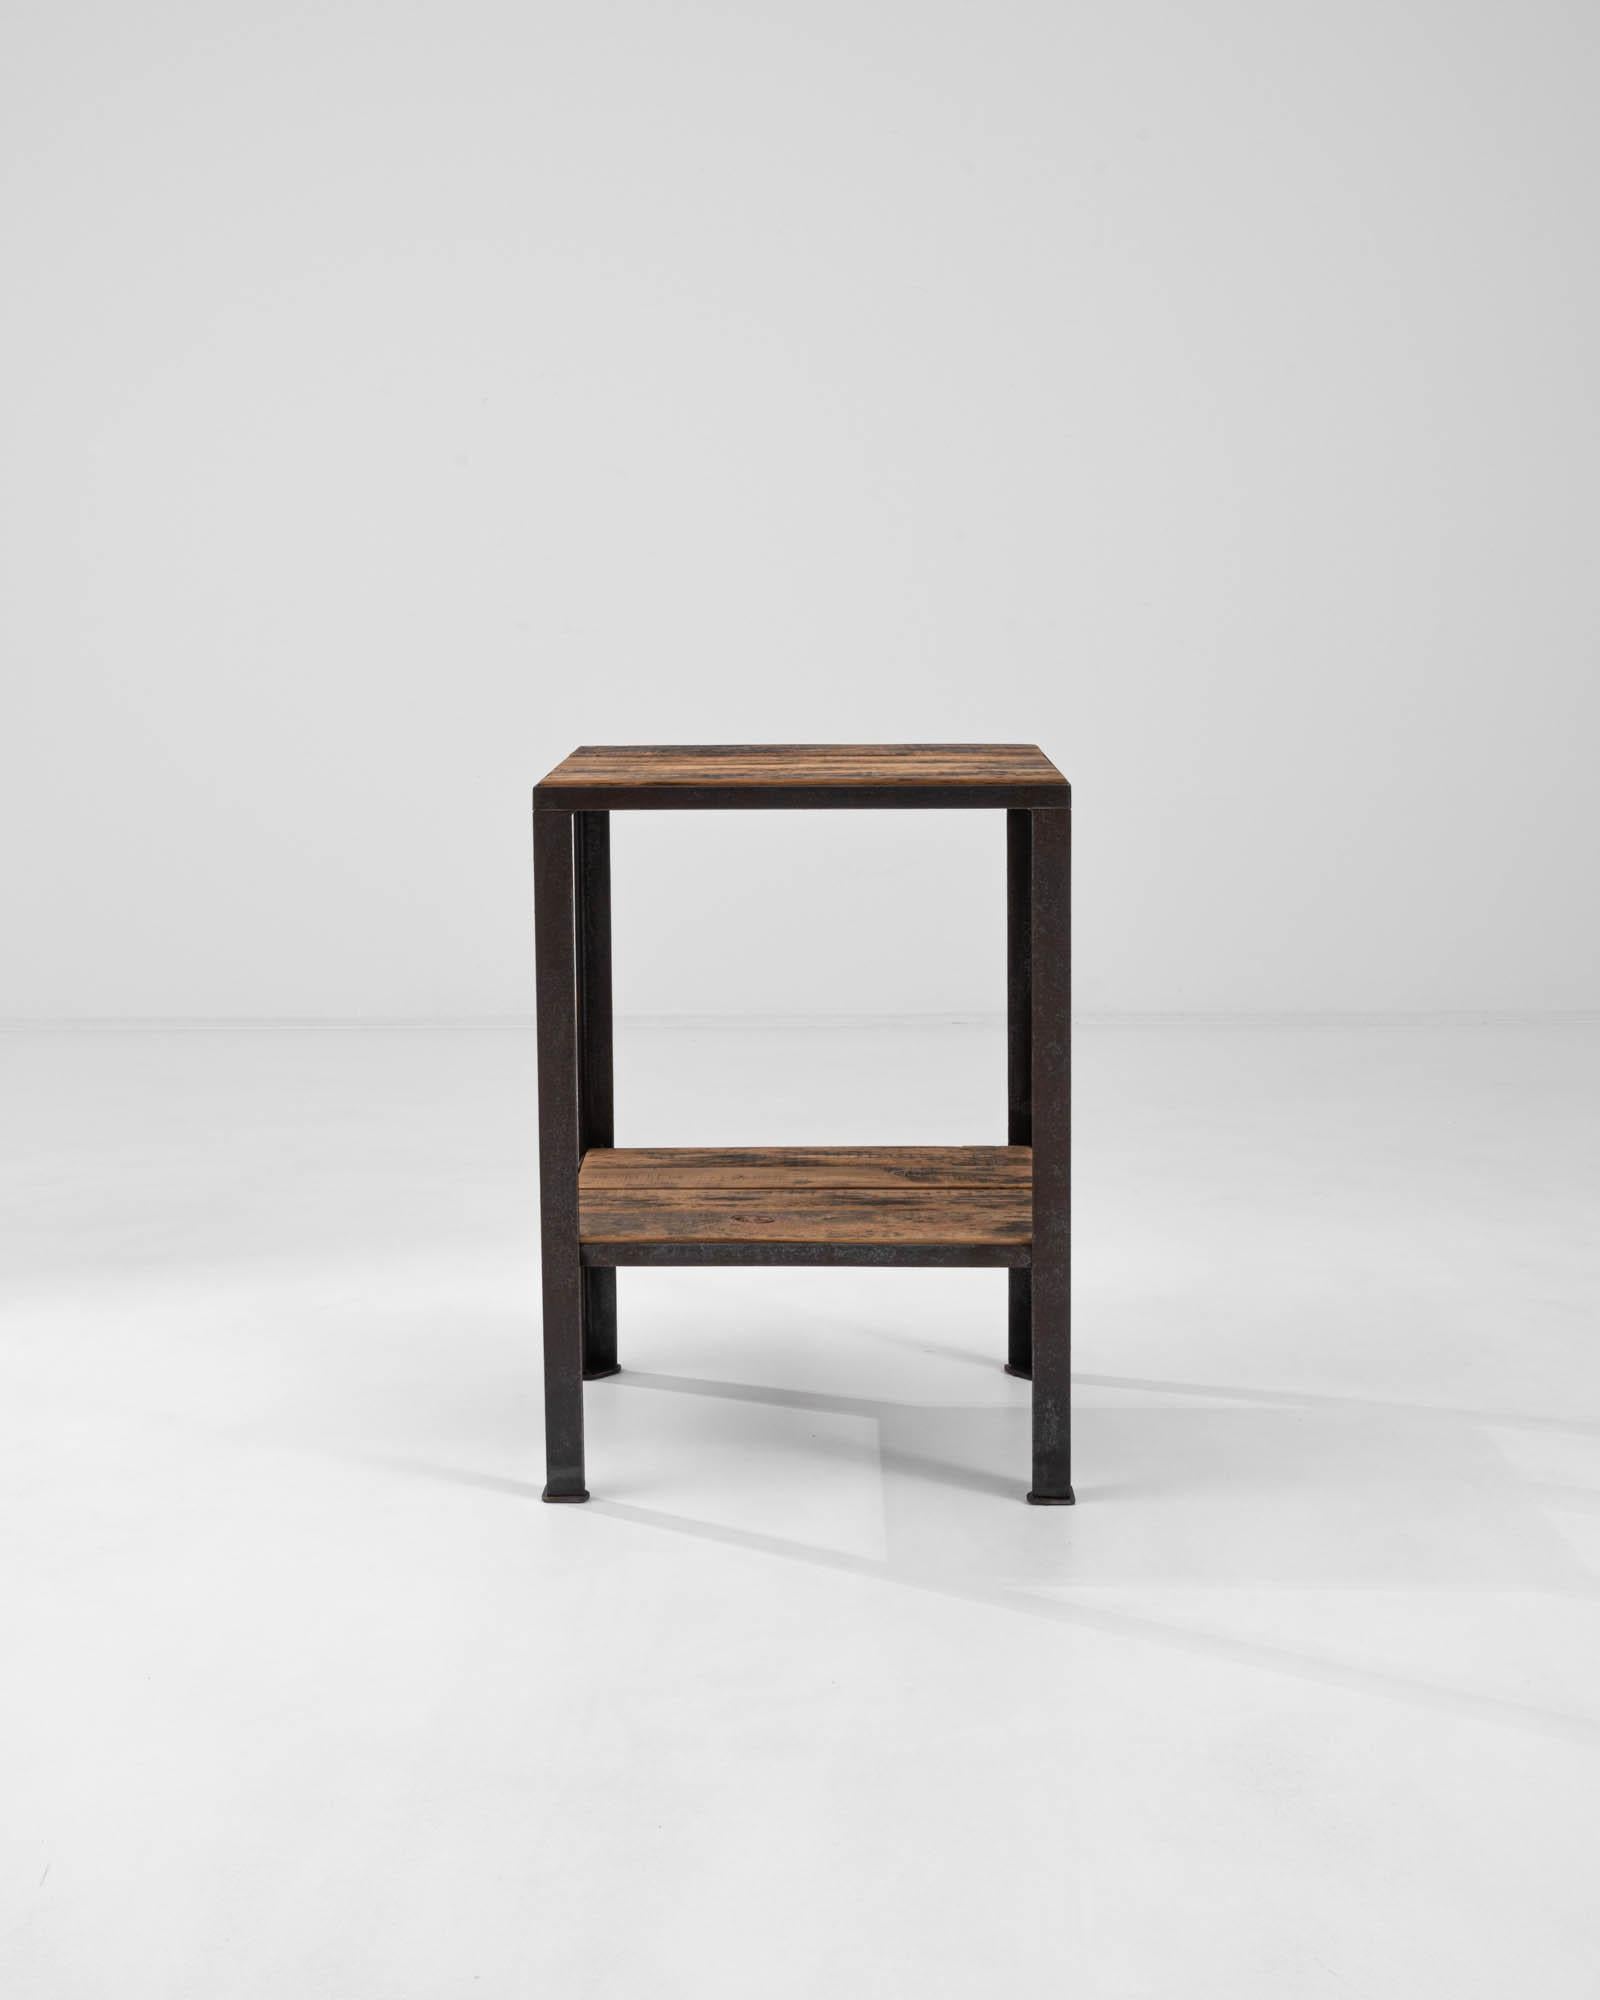 Presenting a harmonious blend of form and function, this 20th Century French Metal & Wooden Side Table exudes a minimalist charm that's both rustic and refined. Crafted with the durability of time-tested materials, it features a sleek, dark metal